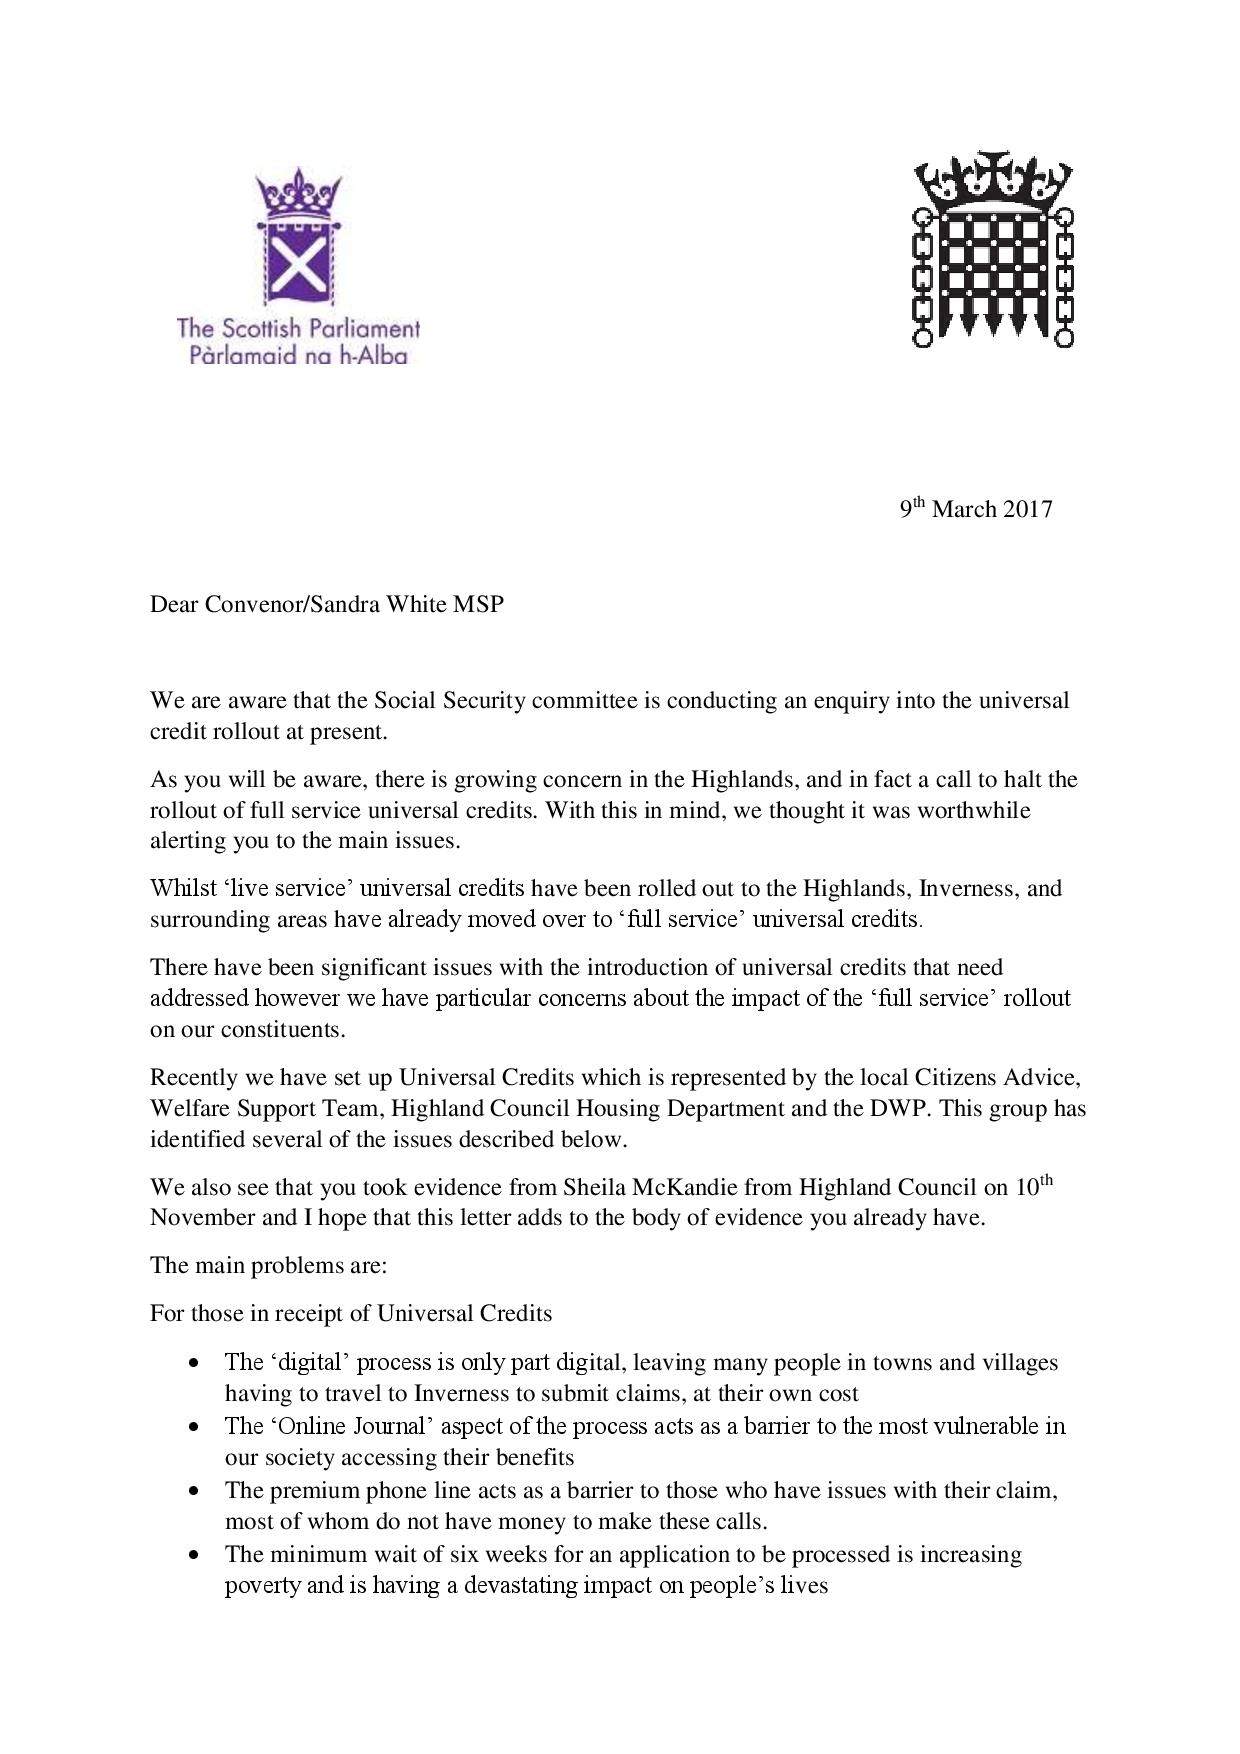 Letter to Minister - Universal Credit - Drew Hendry MP